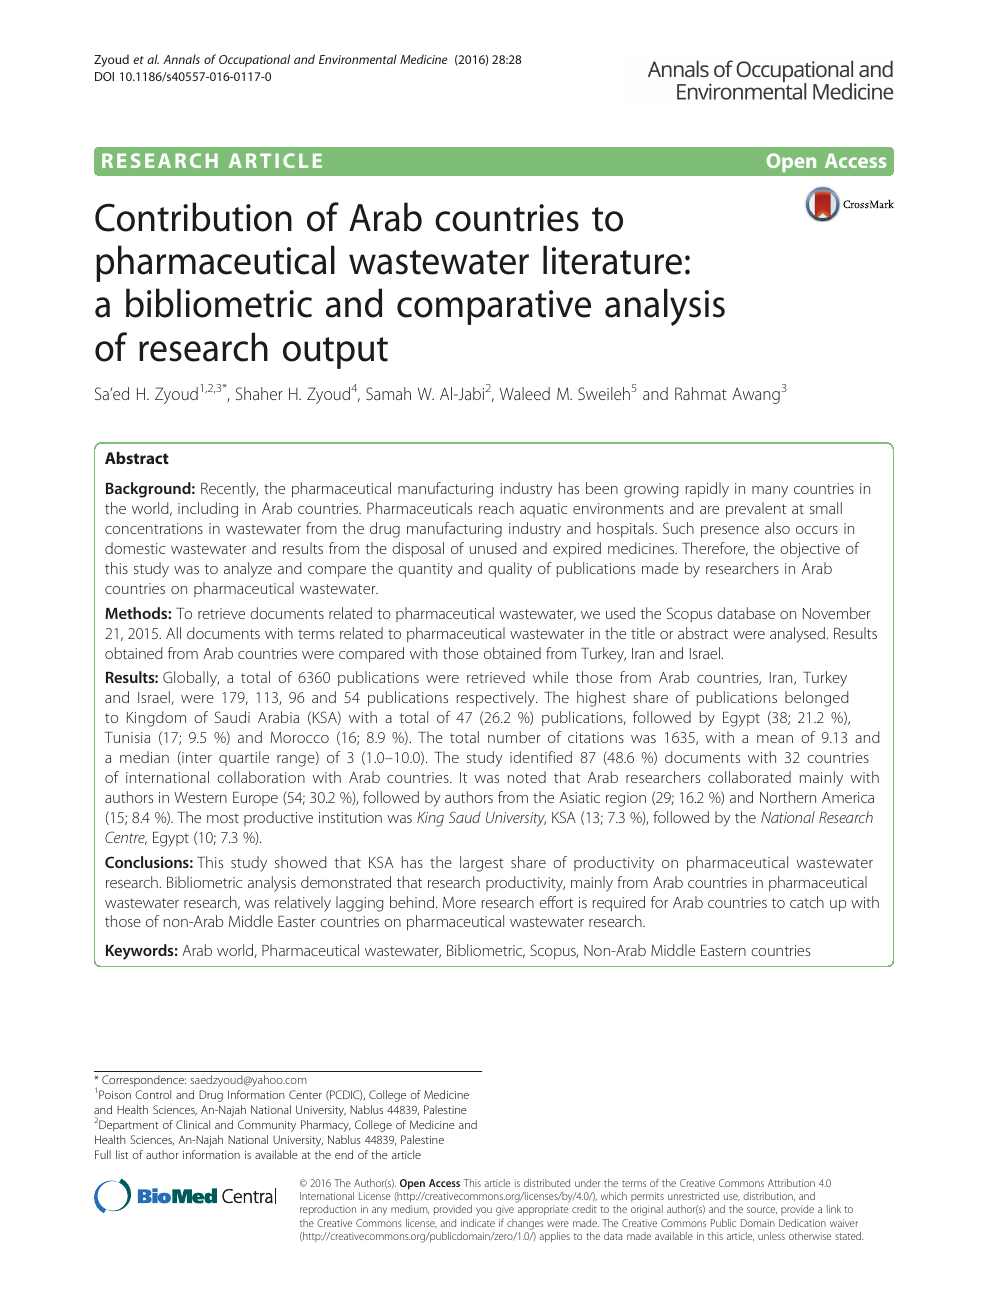 Contribution Of Arab Countries To Pharmaceutical Wastewater Literature A Bibliometric And Comparative Analysis Of Research Output Topic Of Research Paper In Health Sciences Download Scholarly Article Pdf And Read For Free